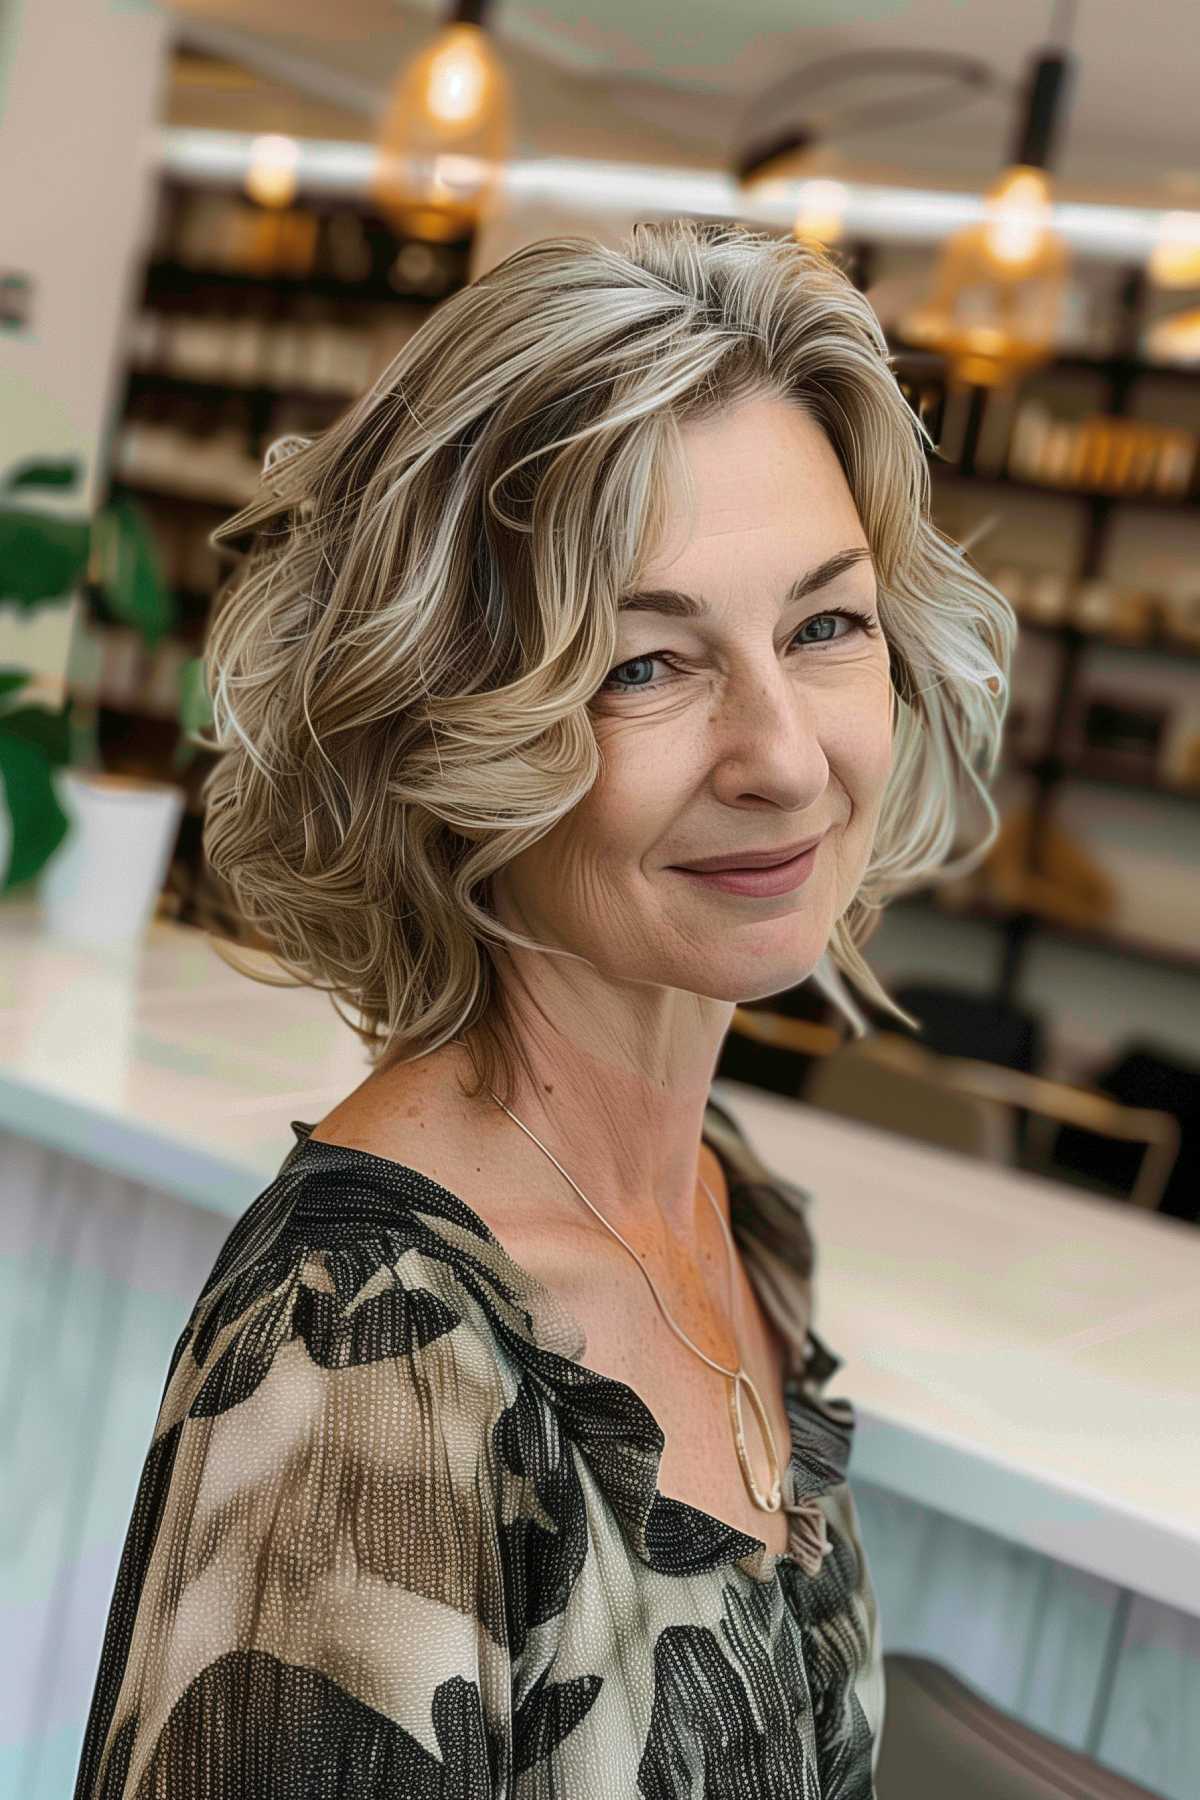 A woman with a cute and stylish bob featuring soft curls and blonde highlights.